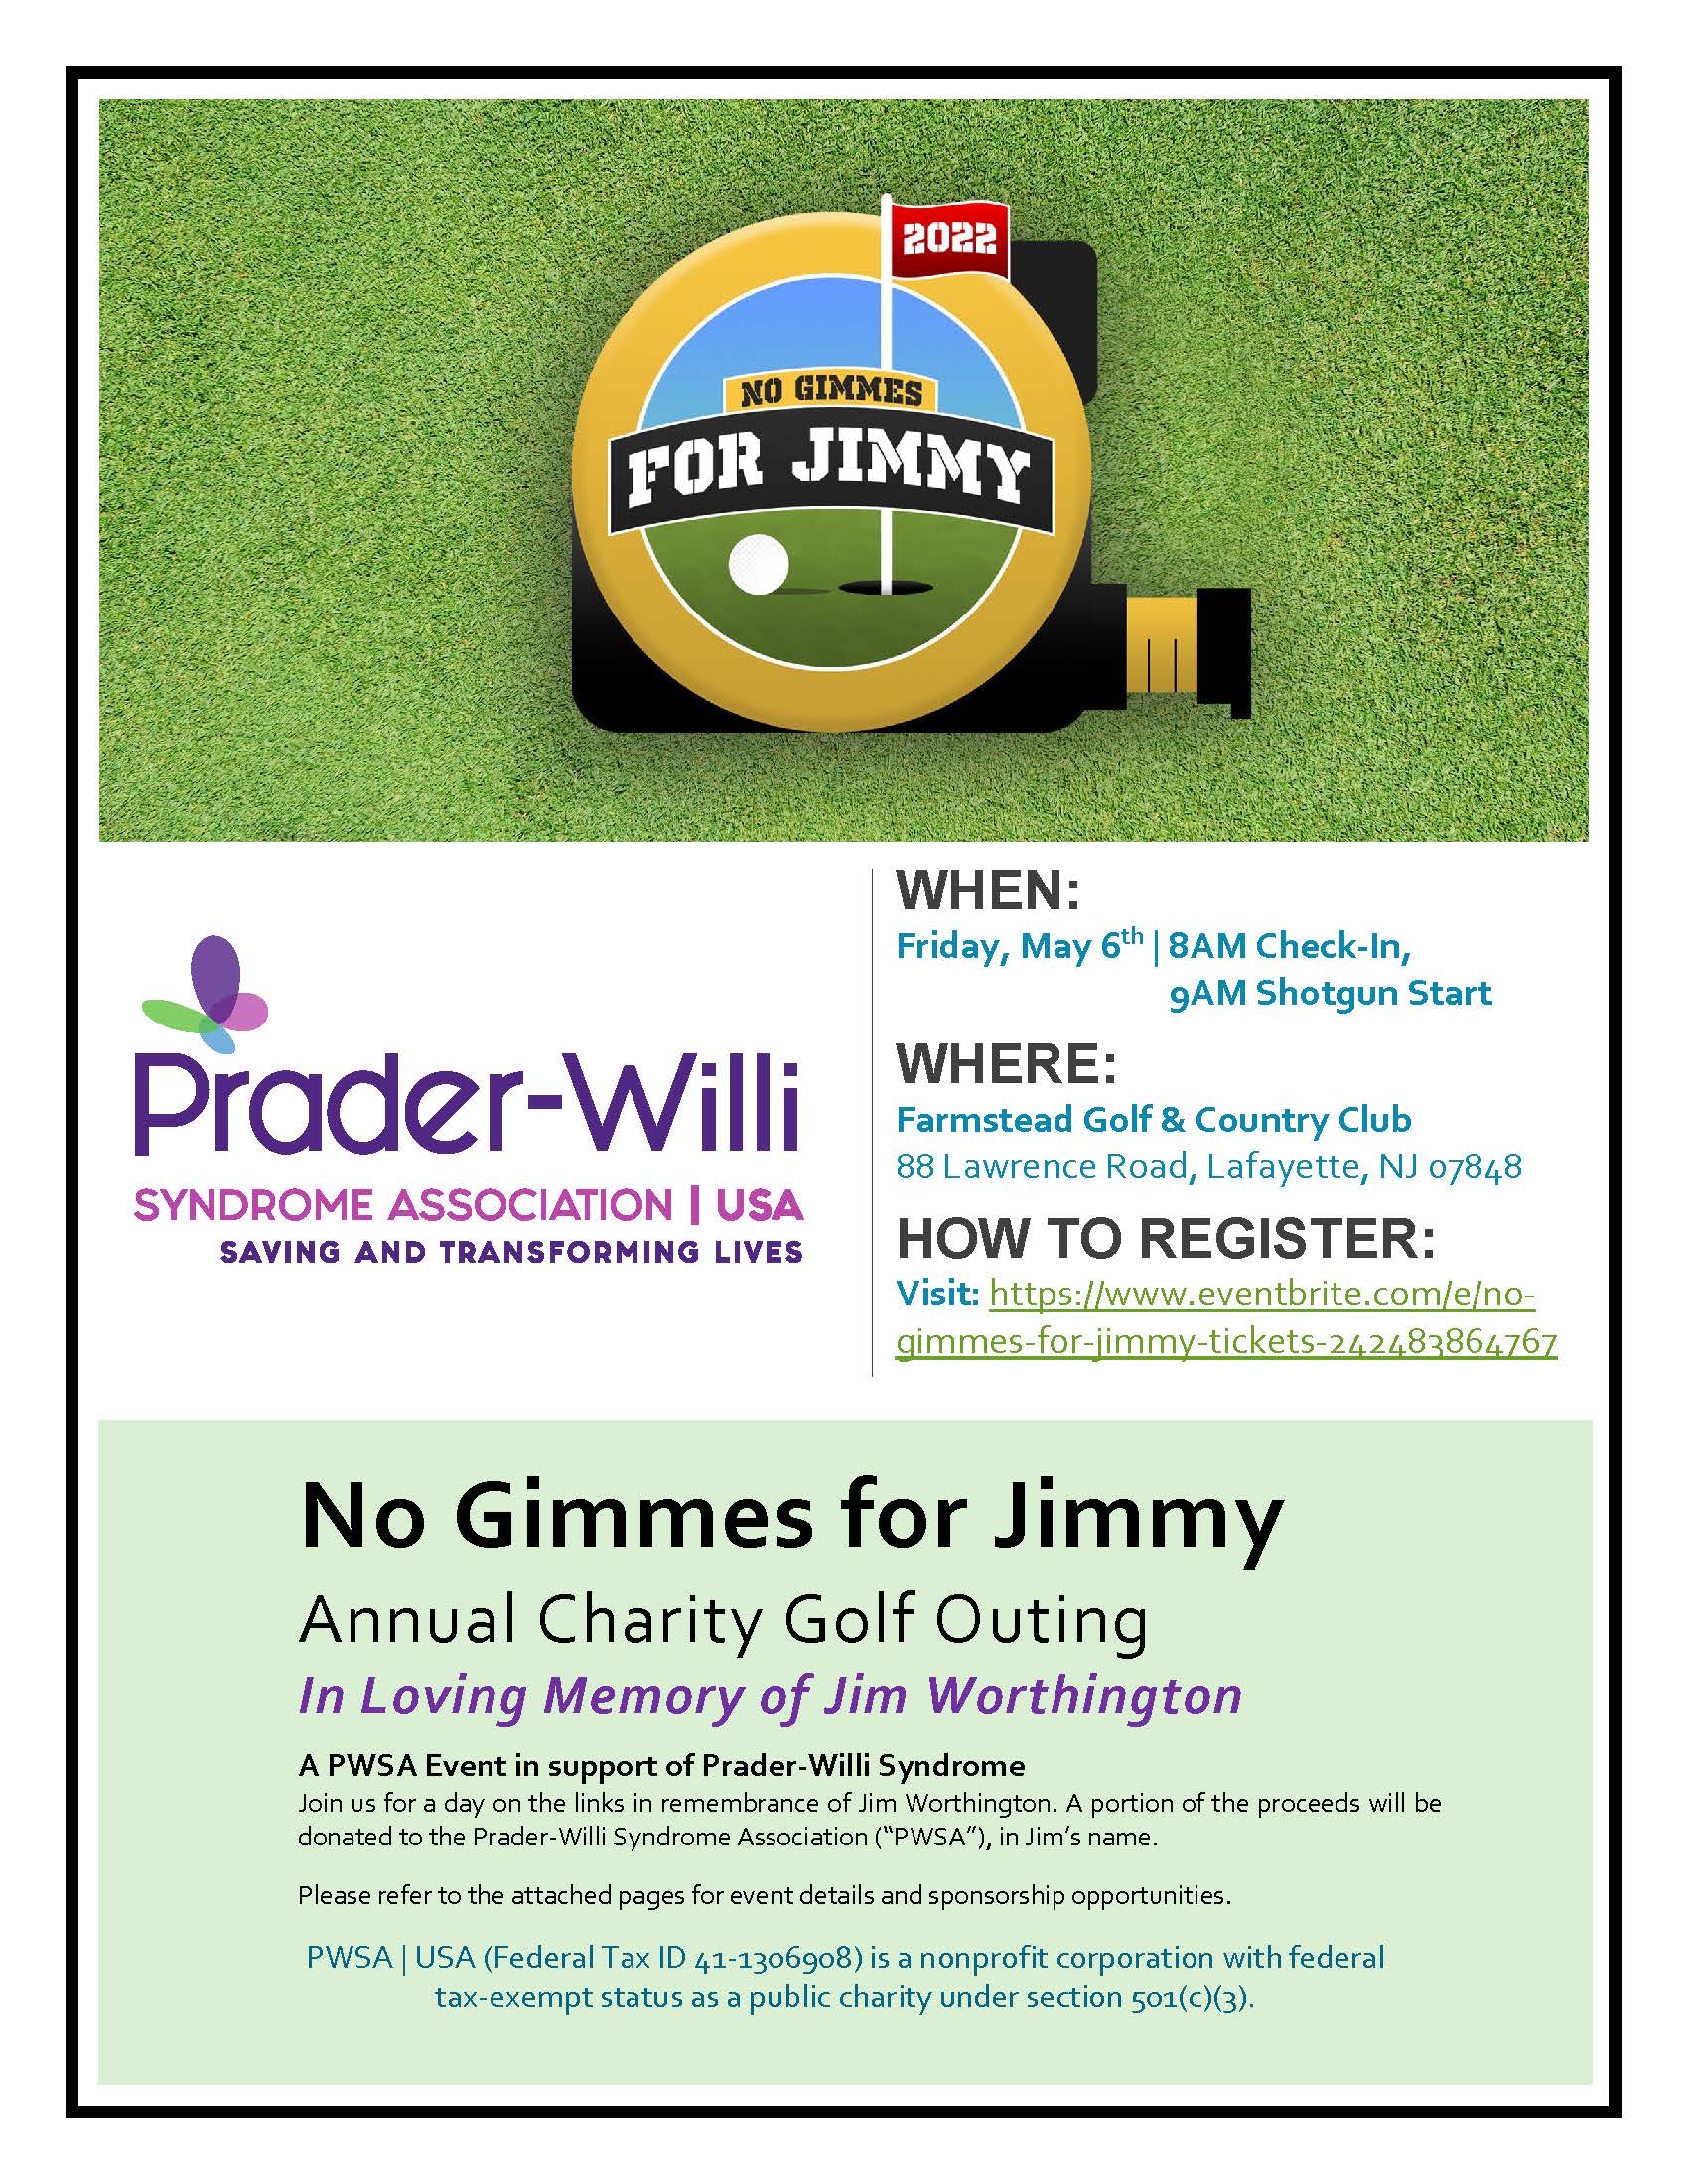 No Gimmes For Jimmy Event Poster, Prader-Willi Syndrome Association | USA